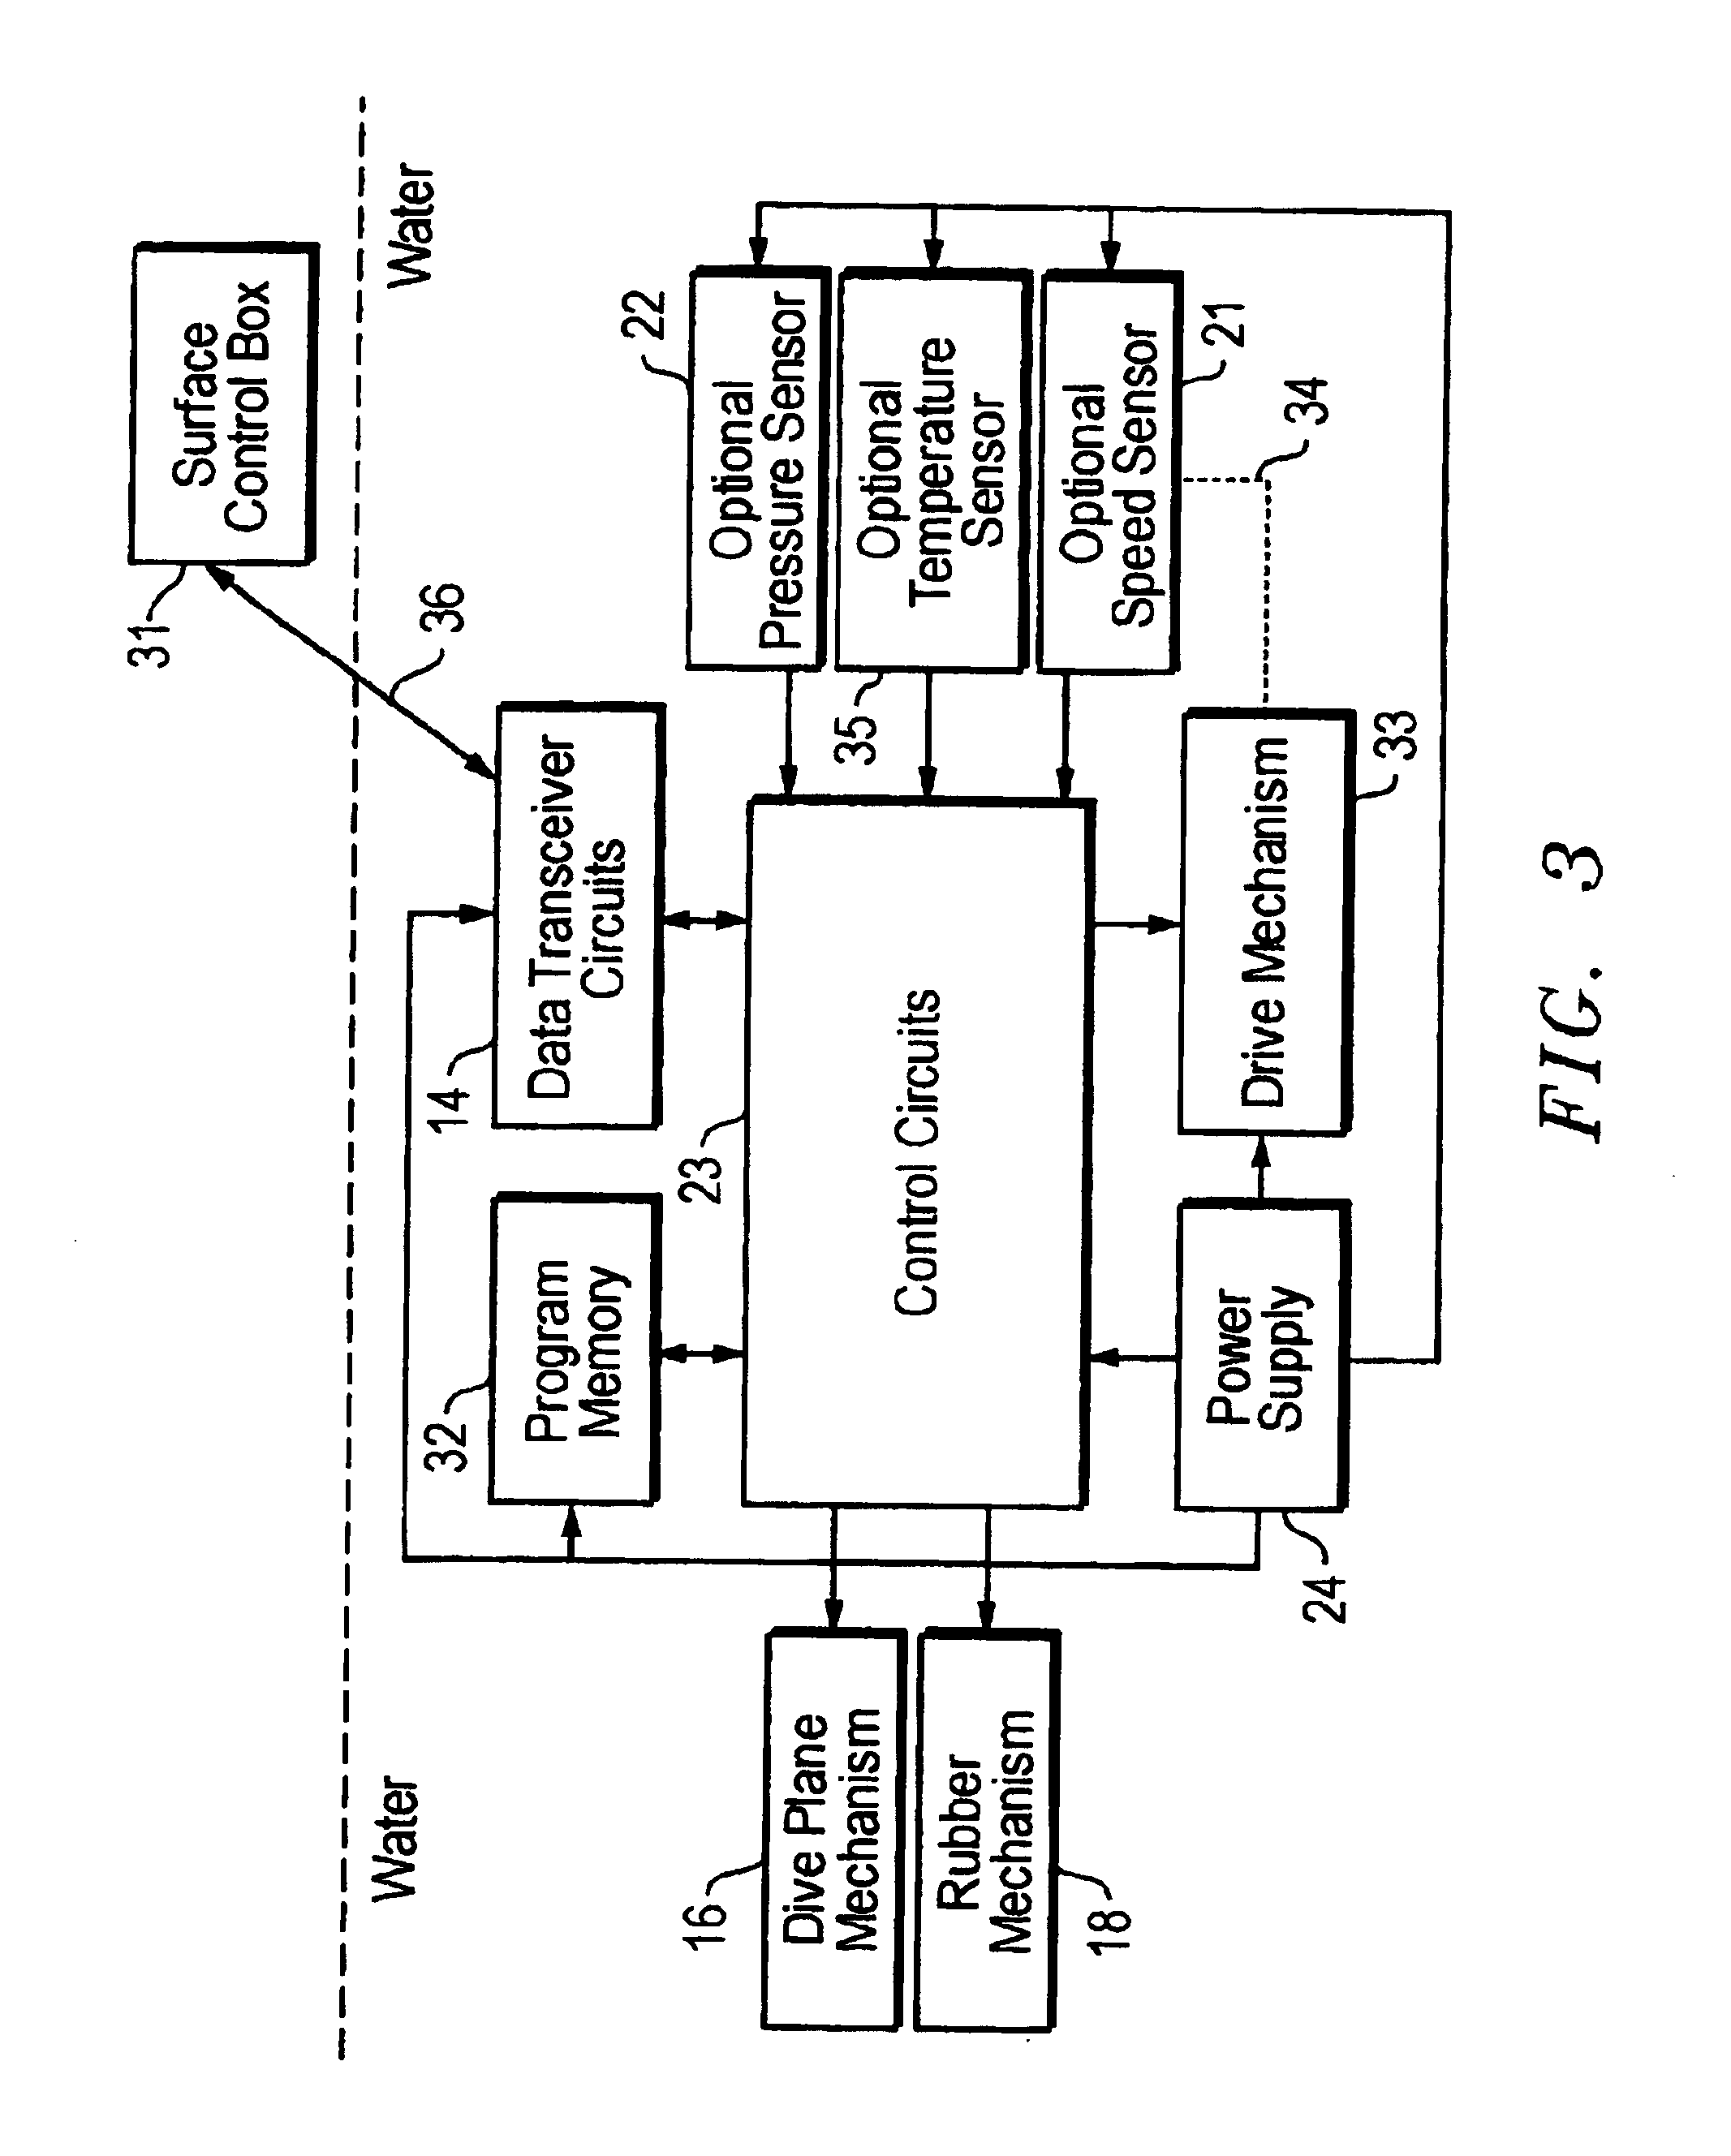 Electronic fishing device steerable in azimuth and depth by remote control or preprogrammed instructions